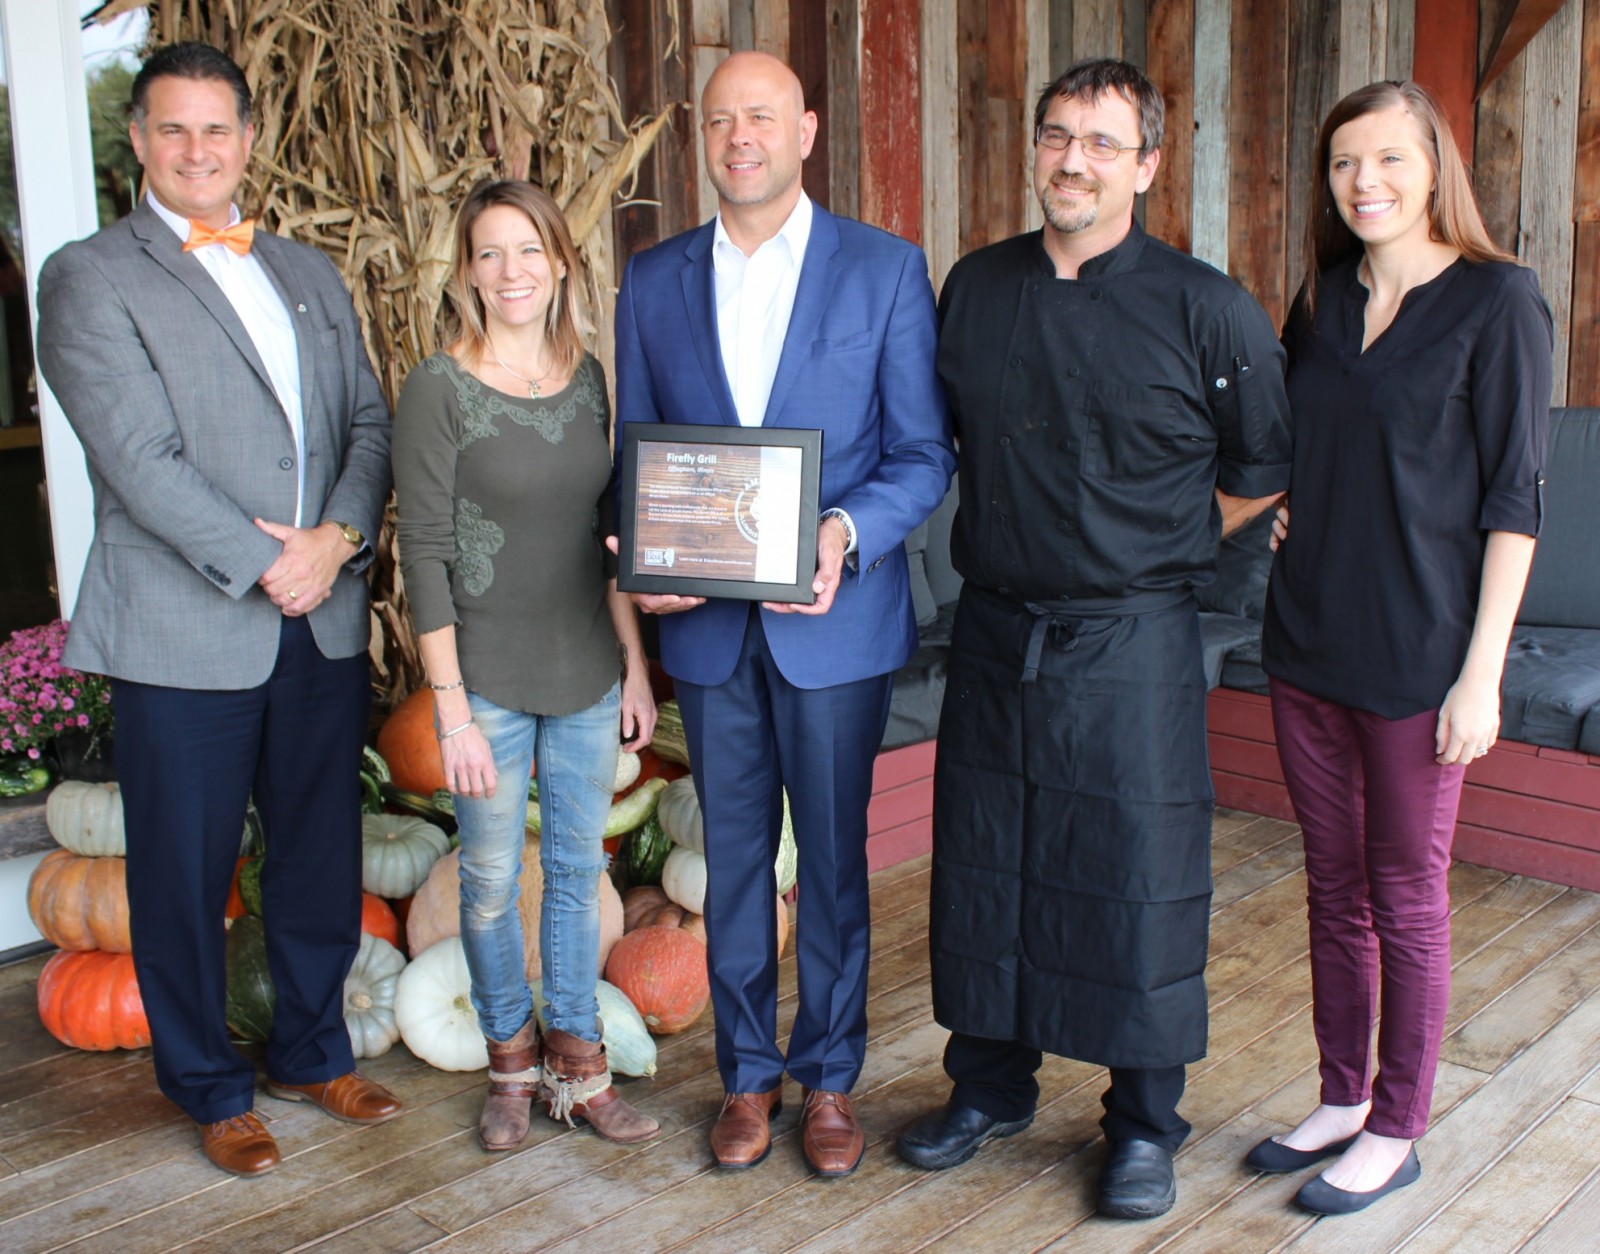 Cory Jobe officially recognizes the Firefly Grill as an "Illinois Maker" (Pictured L-R) Effingham Mayor Jeff Bloemker, Firefly Co-owner Kristie Campbell, Illinois Tourism Director Cory Jobe, Firefly Co-owner and Chef Naeel Campbell, Effingham Tourism Director Jodi Thoele. 